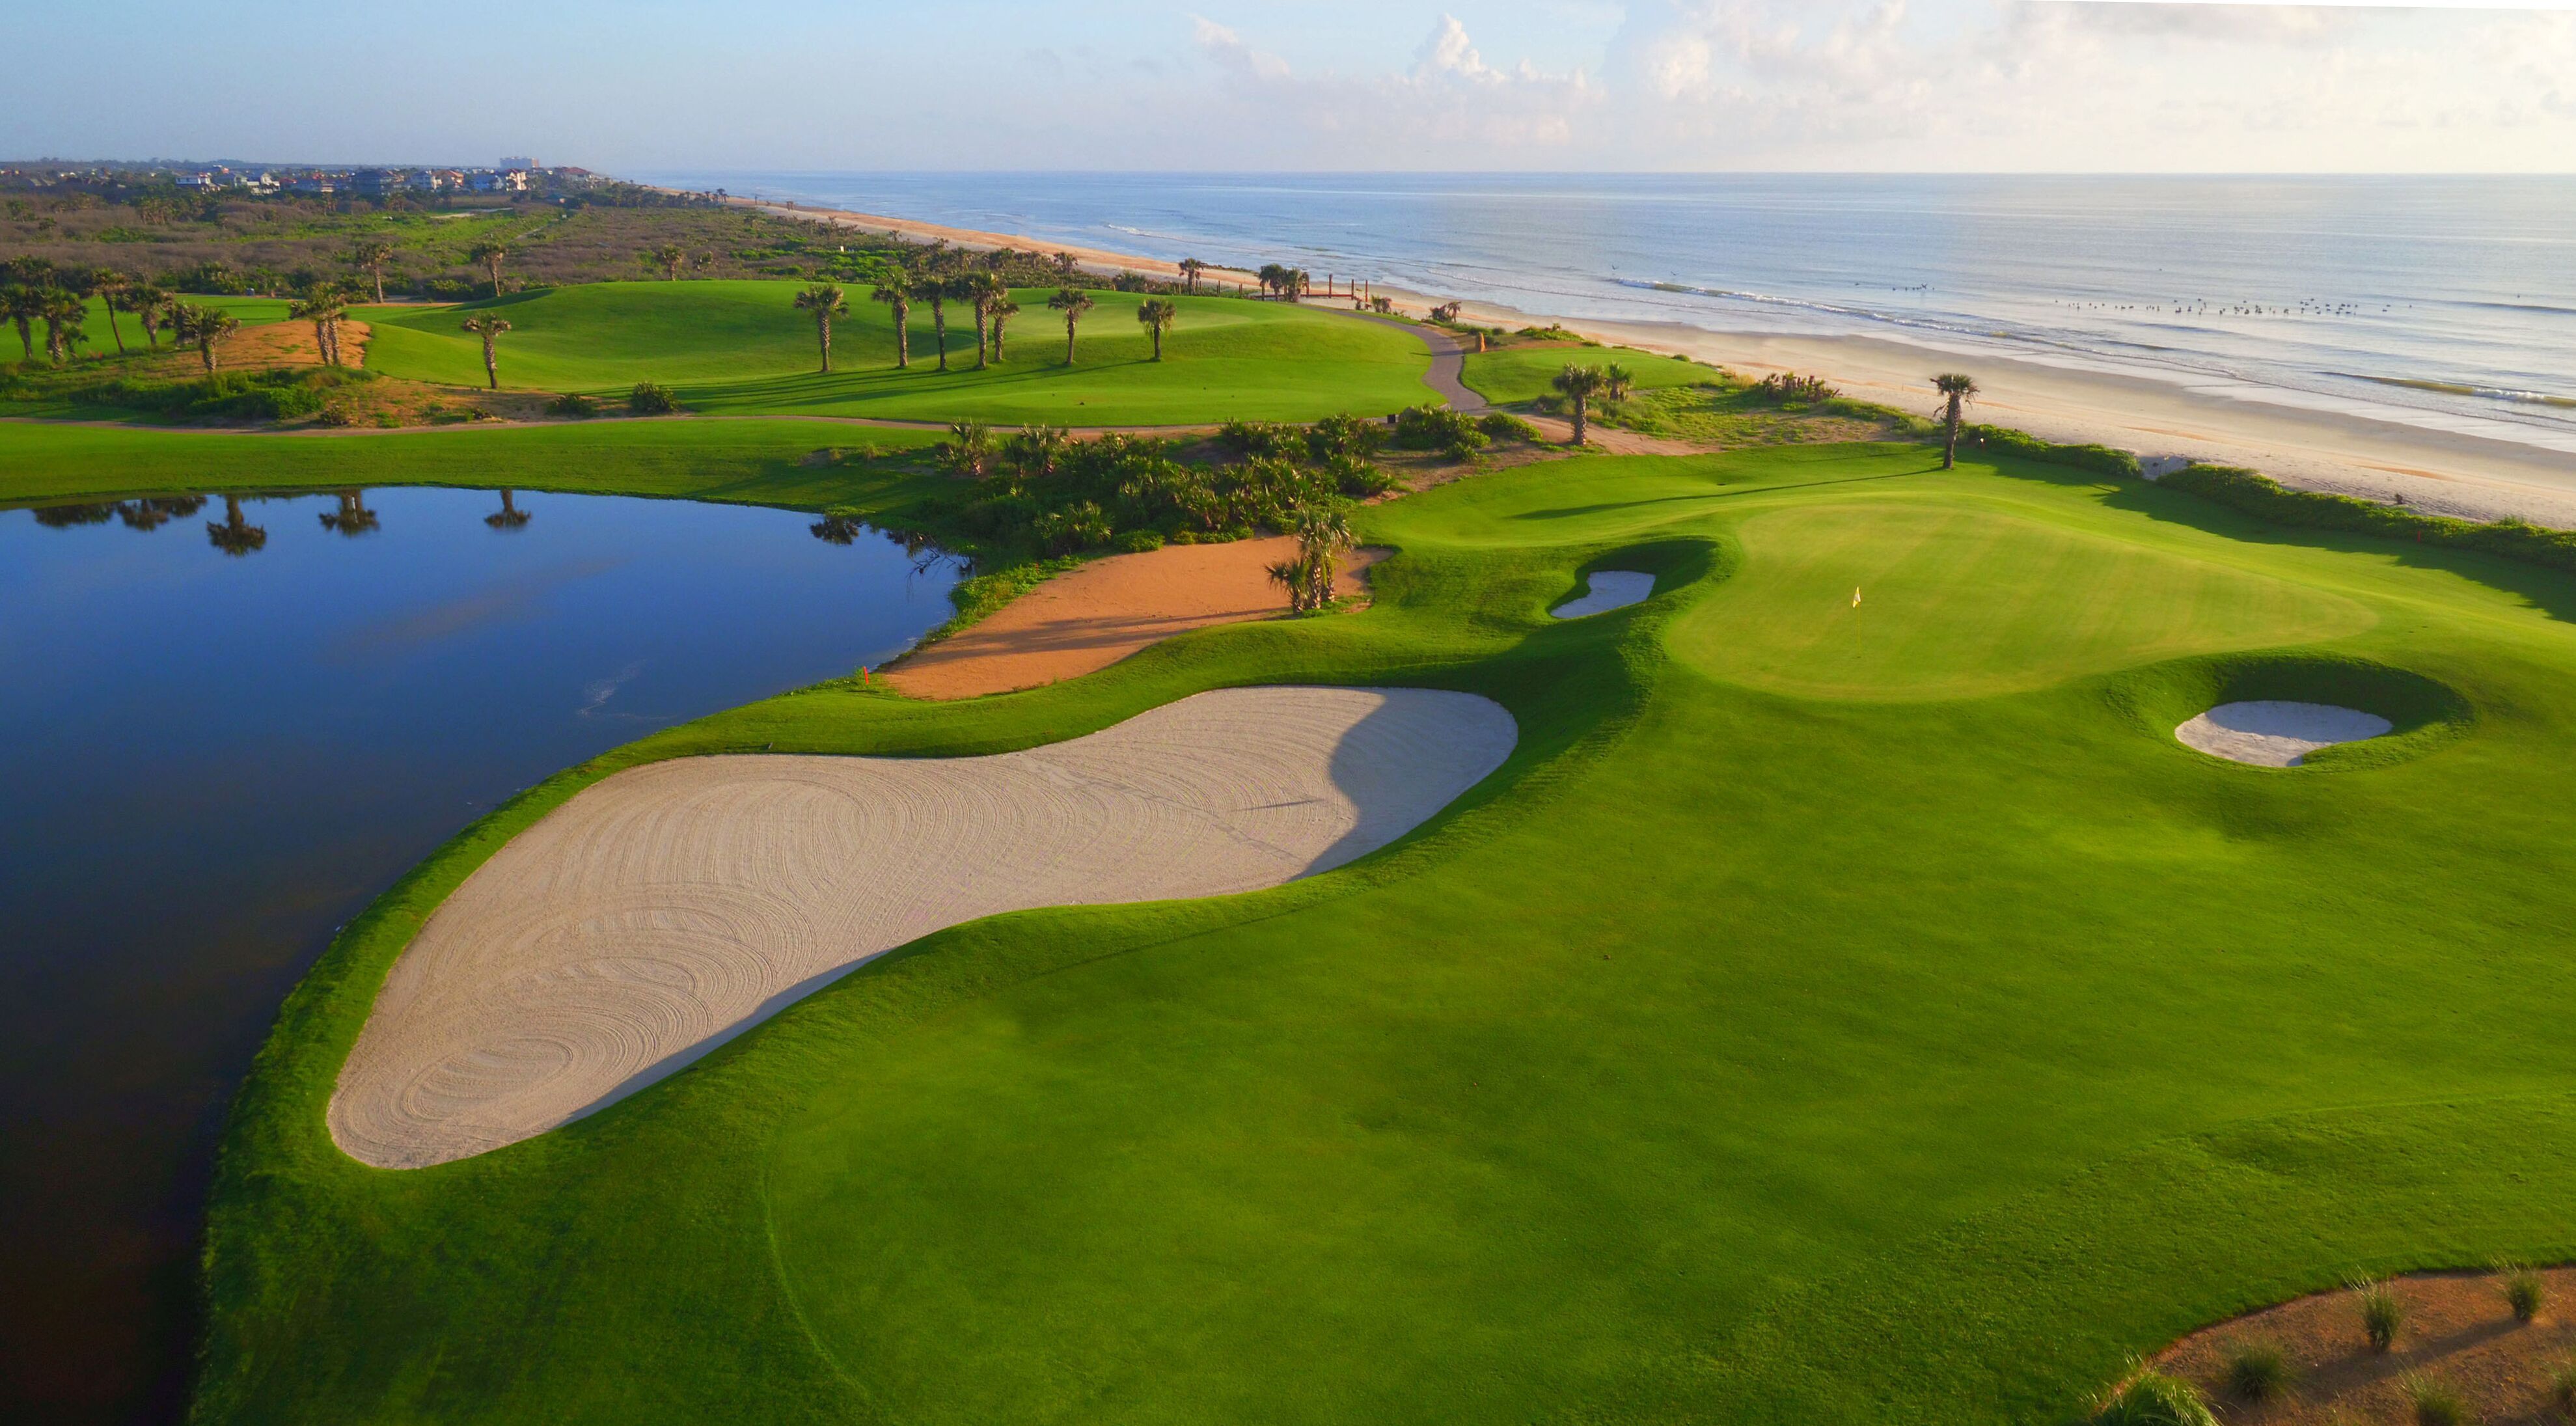 Golf Vacation Package - Hammock Beach Stay and Play!